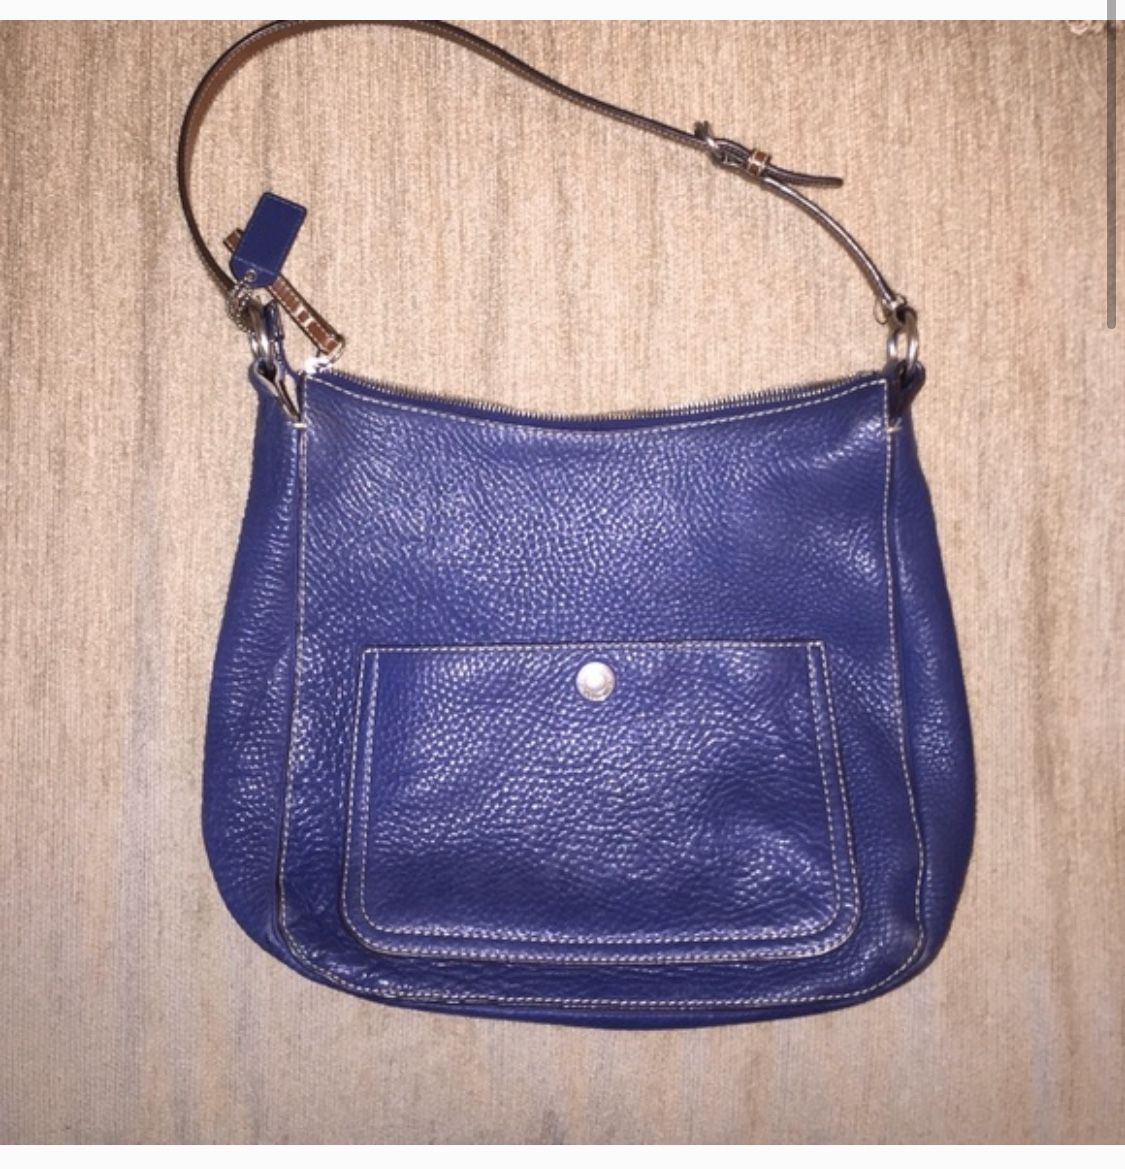 Coach Navy Leather Purse (Hobo Style)